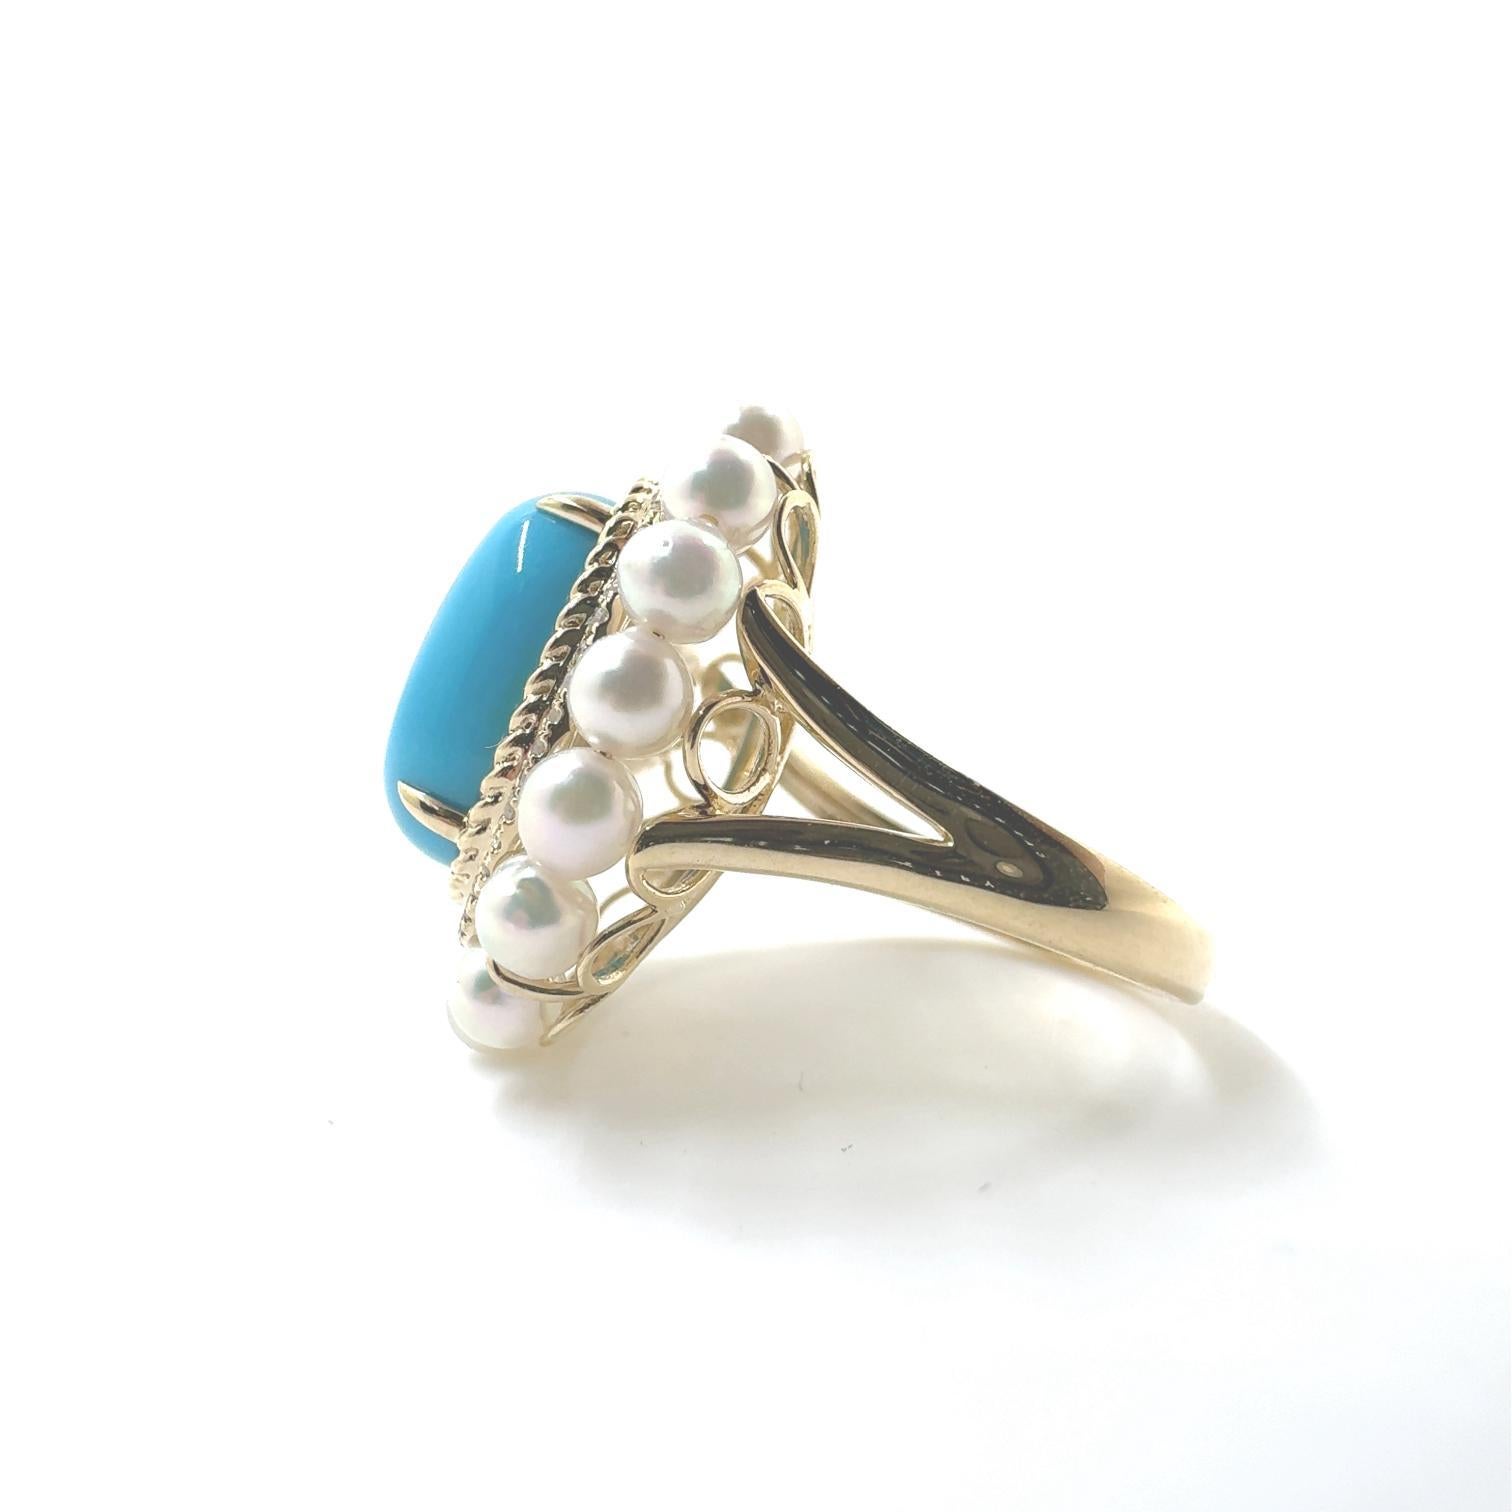 5.15Ct Turquoise Cabochon Pearl Diamond Ring in 14 Karat Yellow Gold For Sale 2